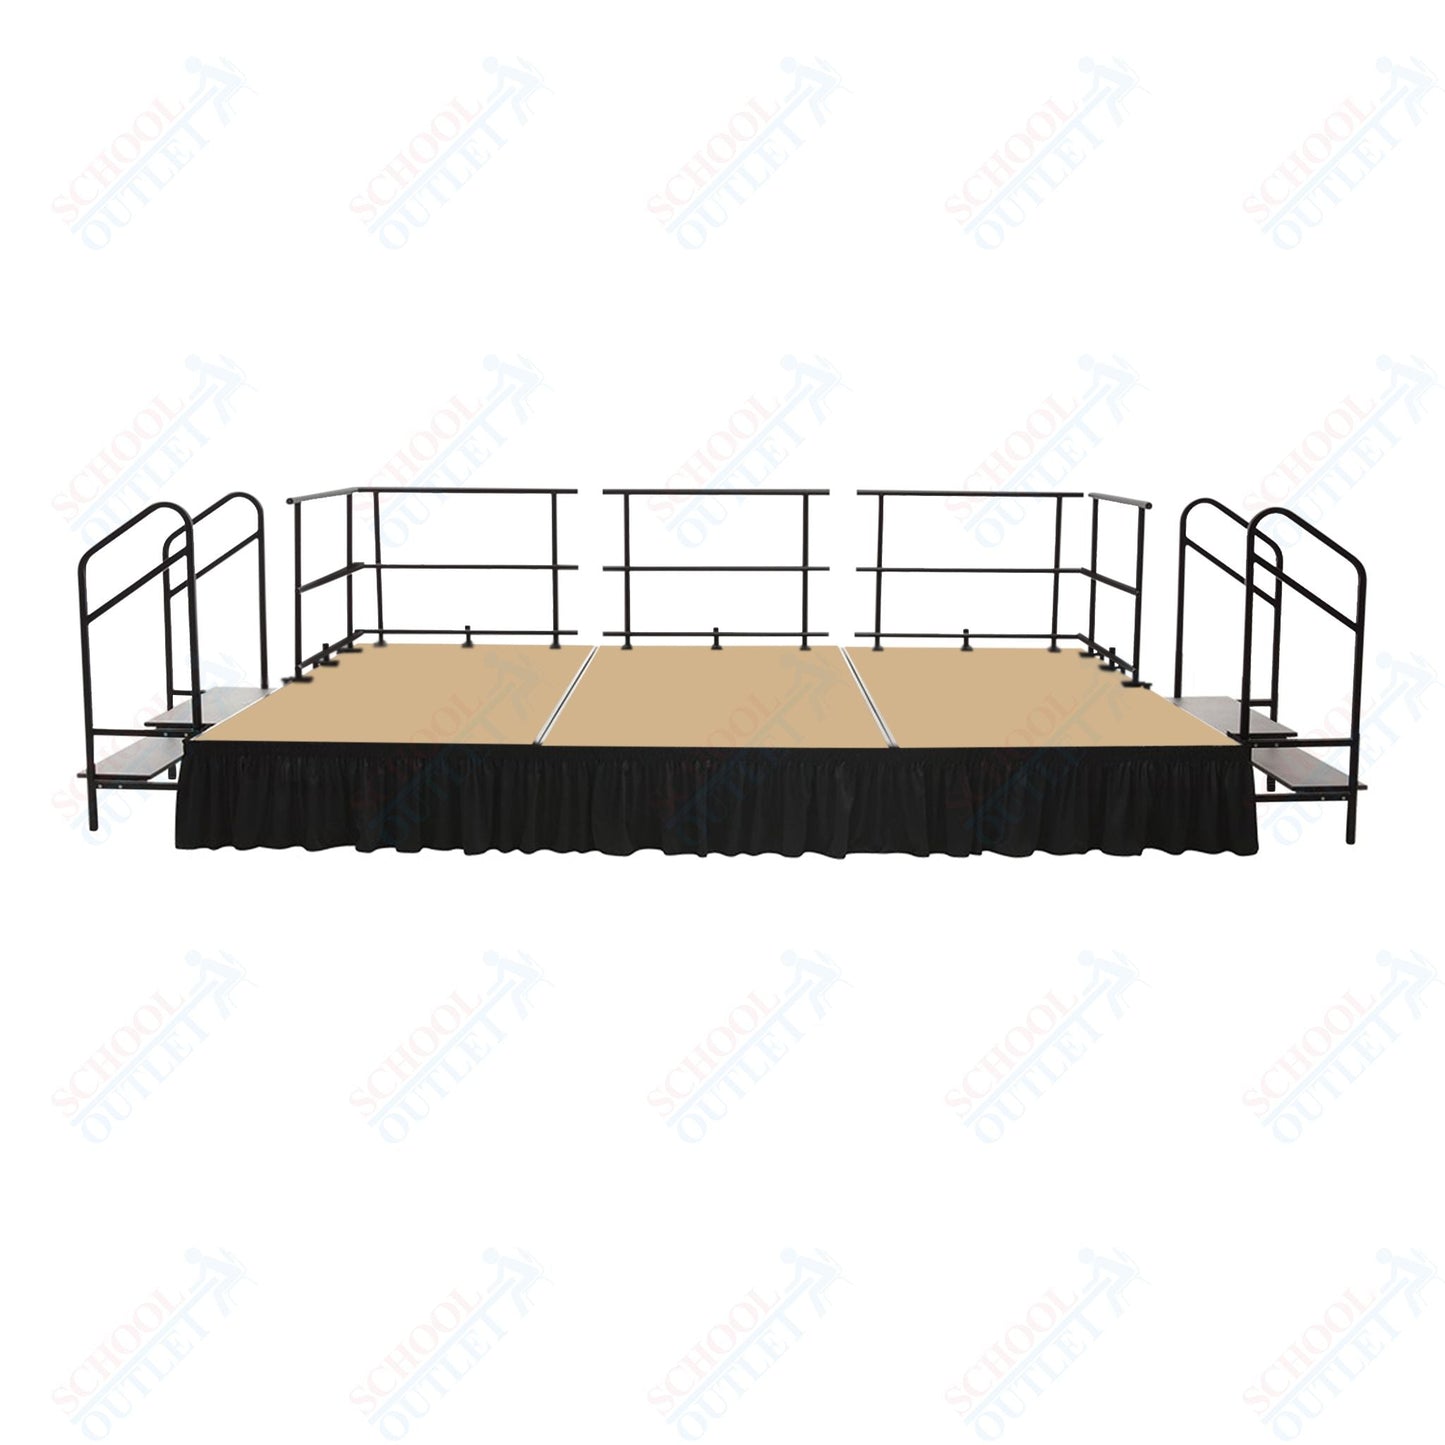 AmTab Fixed Height Stage Set - Carpet Top - 16'W x 32'L x 2'H (192"W x 384"L x 24"H) (AmTab AMT - STS163224C) - SchoolOutlet